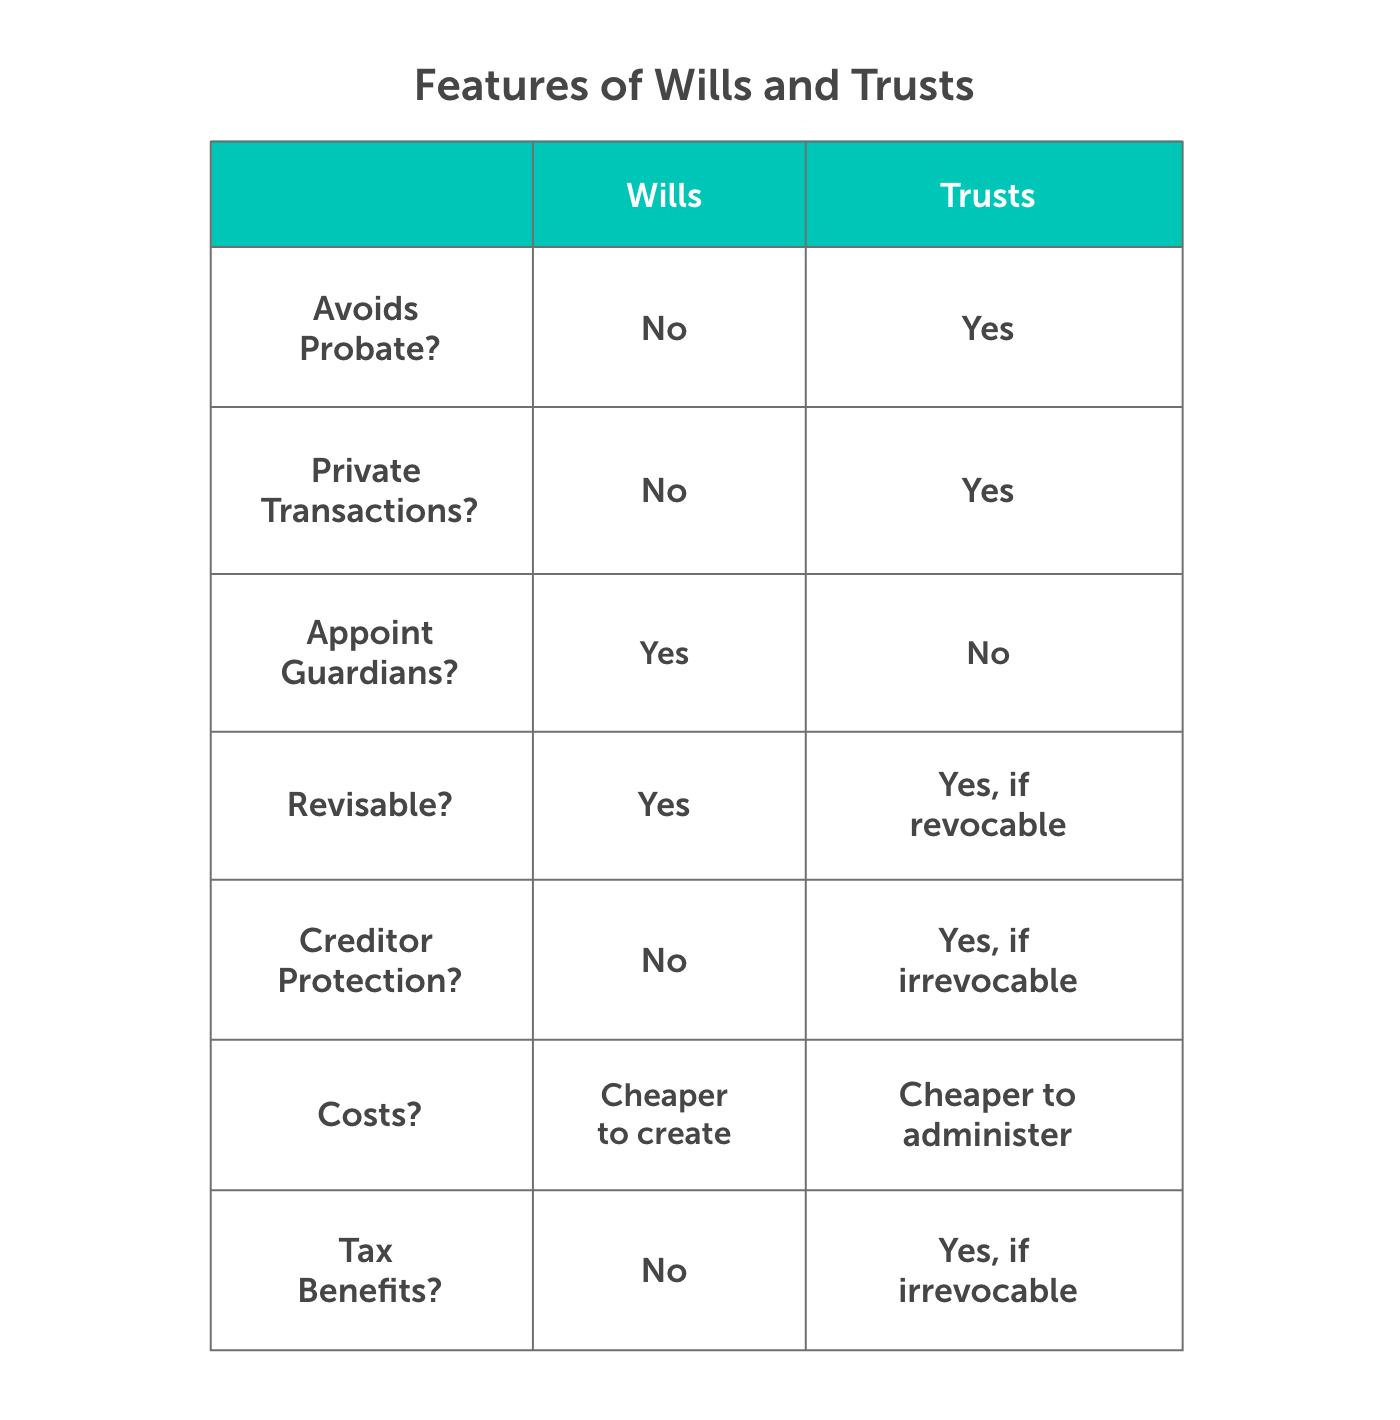 Table titled, "Features of Wills and Trusts". From left to right, the two columns read, wills and trusts. From top to bottom, the rows read, "avoids probate, private transactions, appoint guardians, revisable, creditor protection, costs, tax benefits.